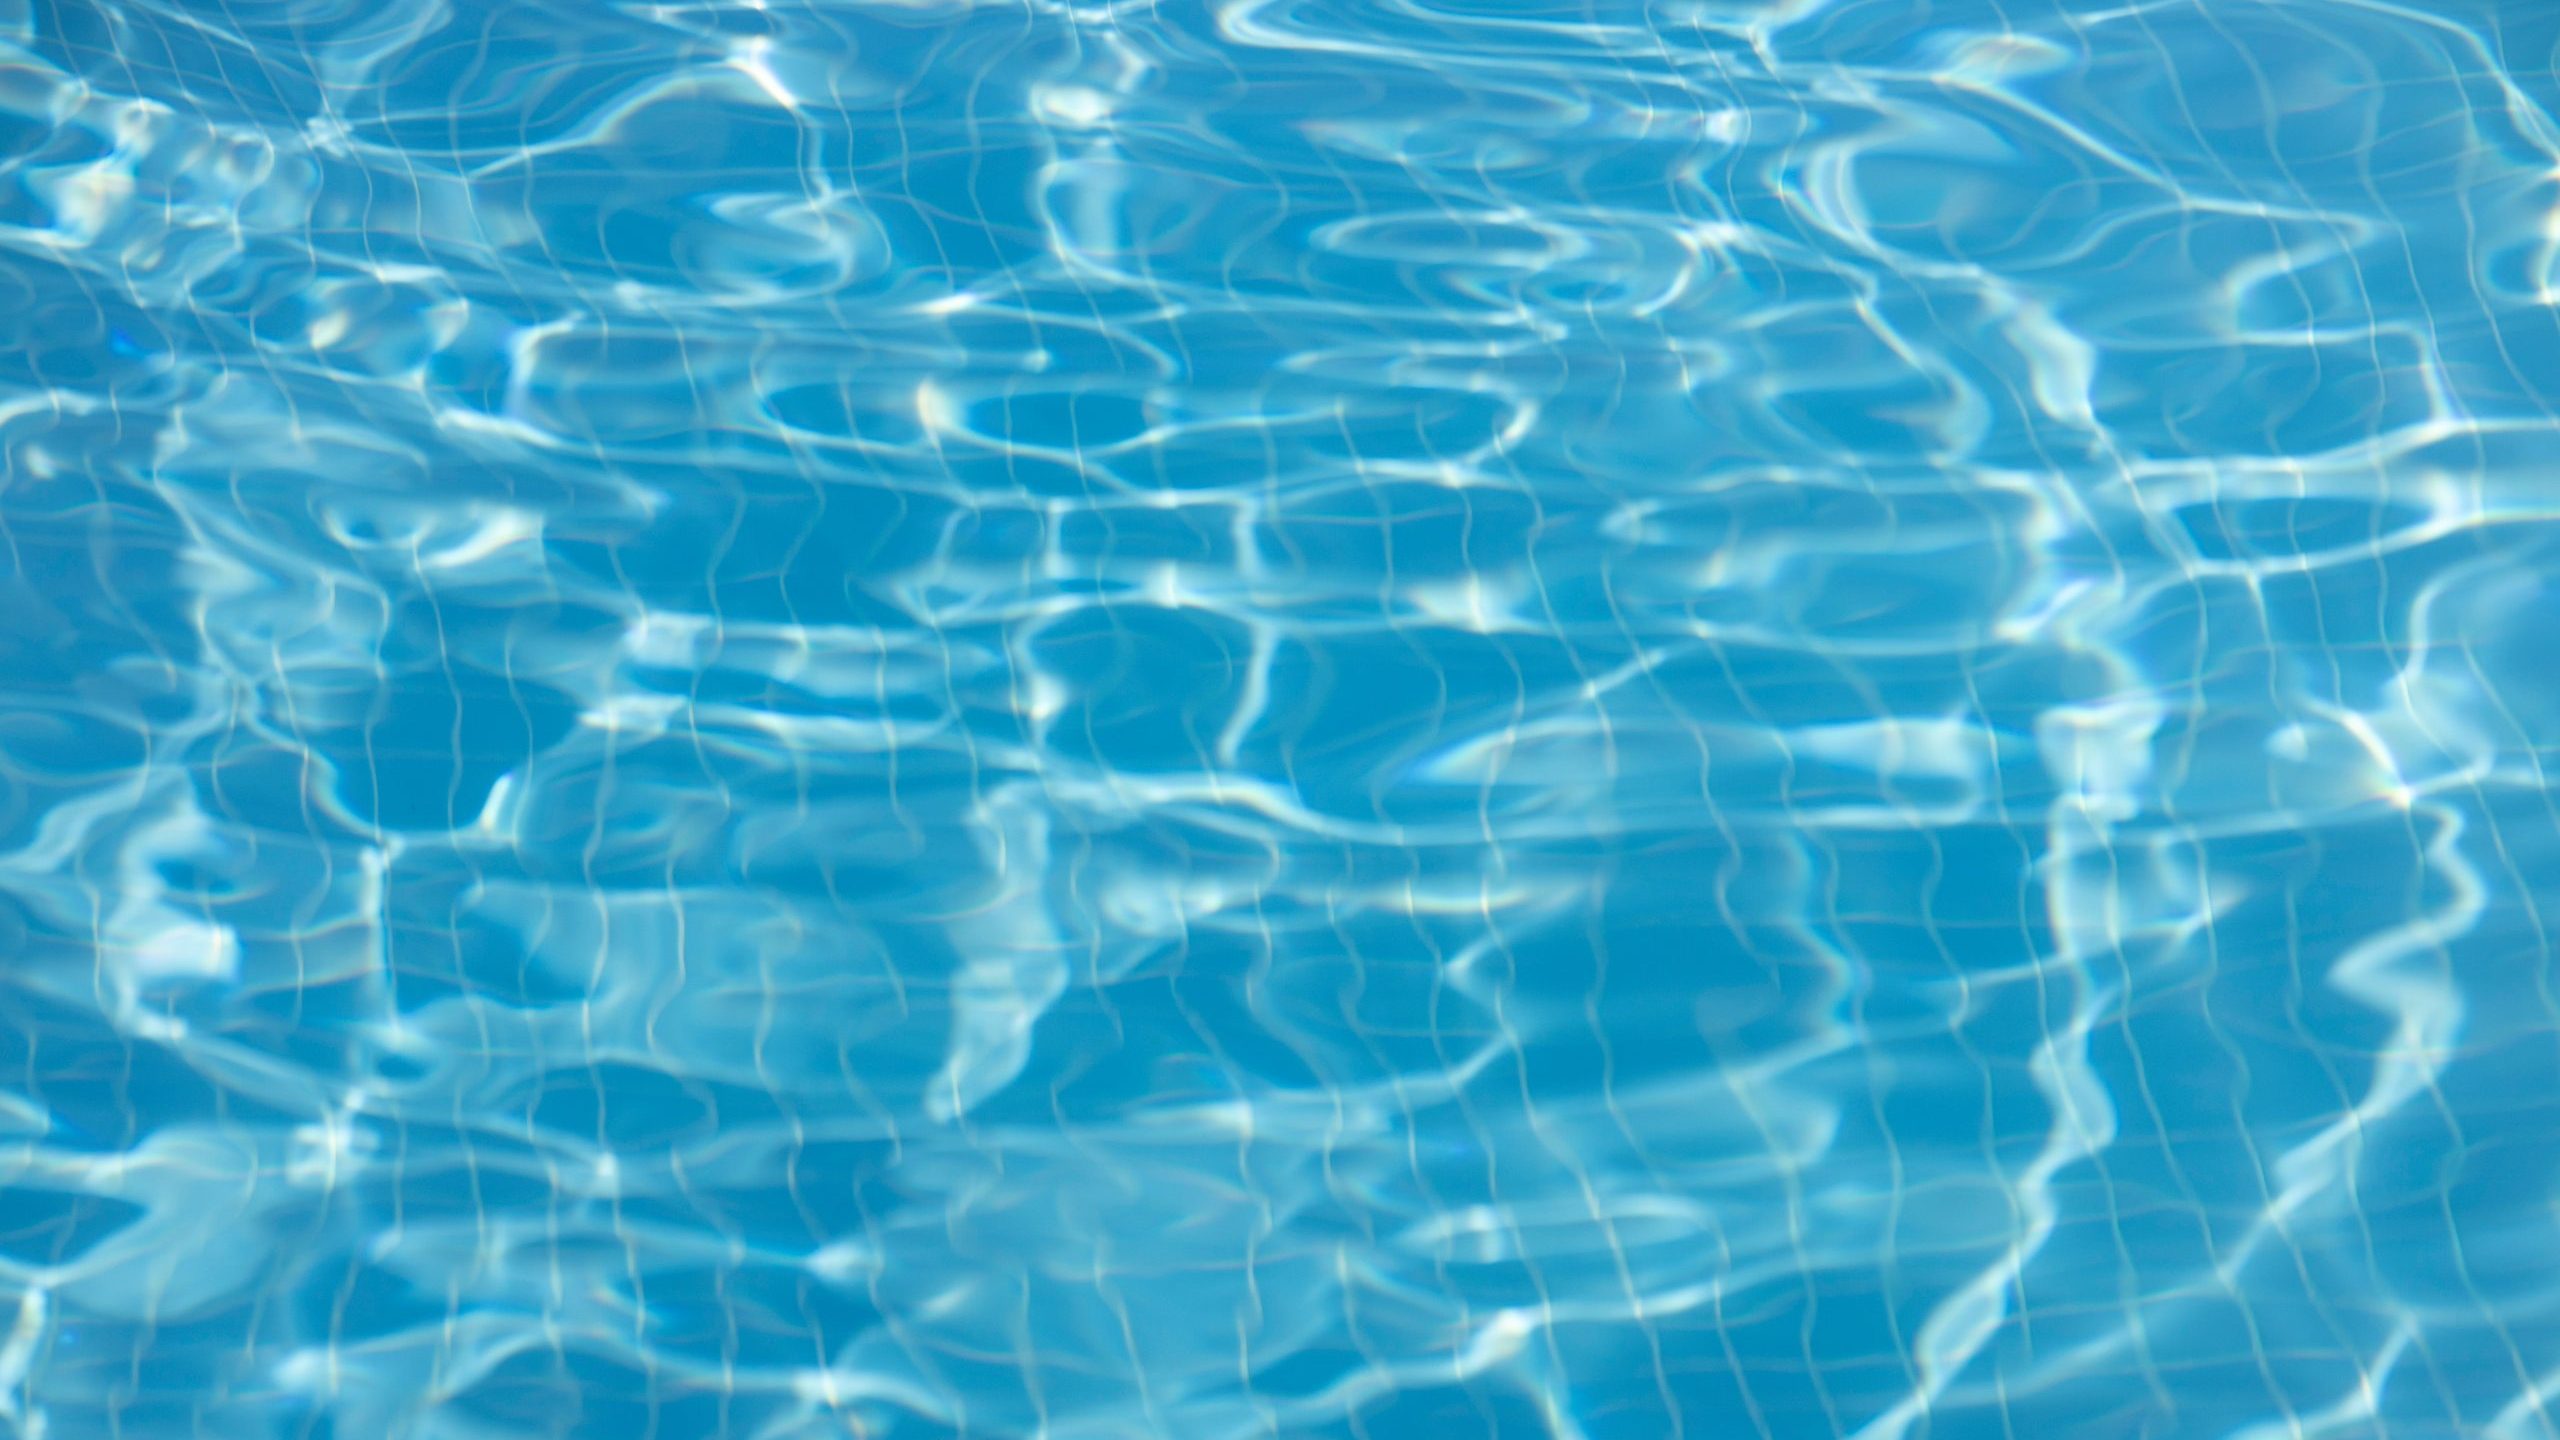 3-year-old boy dies after falling into backyard swimming pool in Phoenix